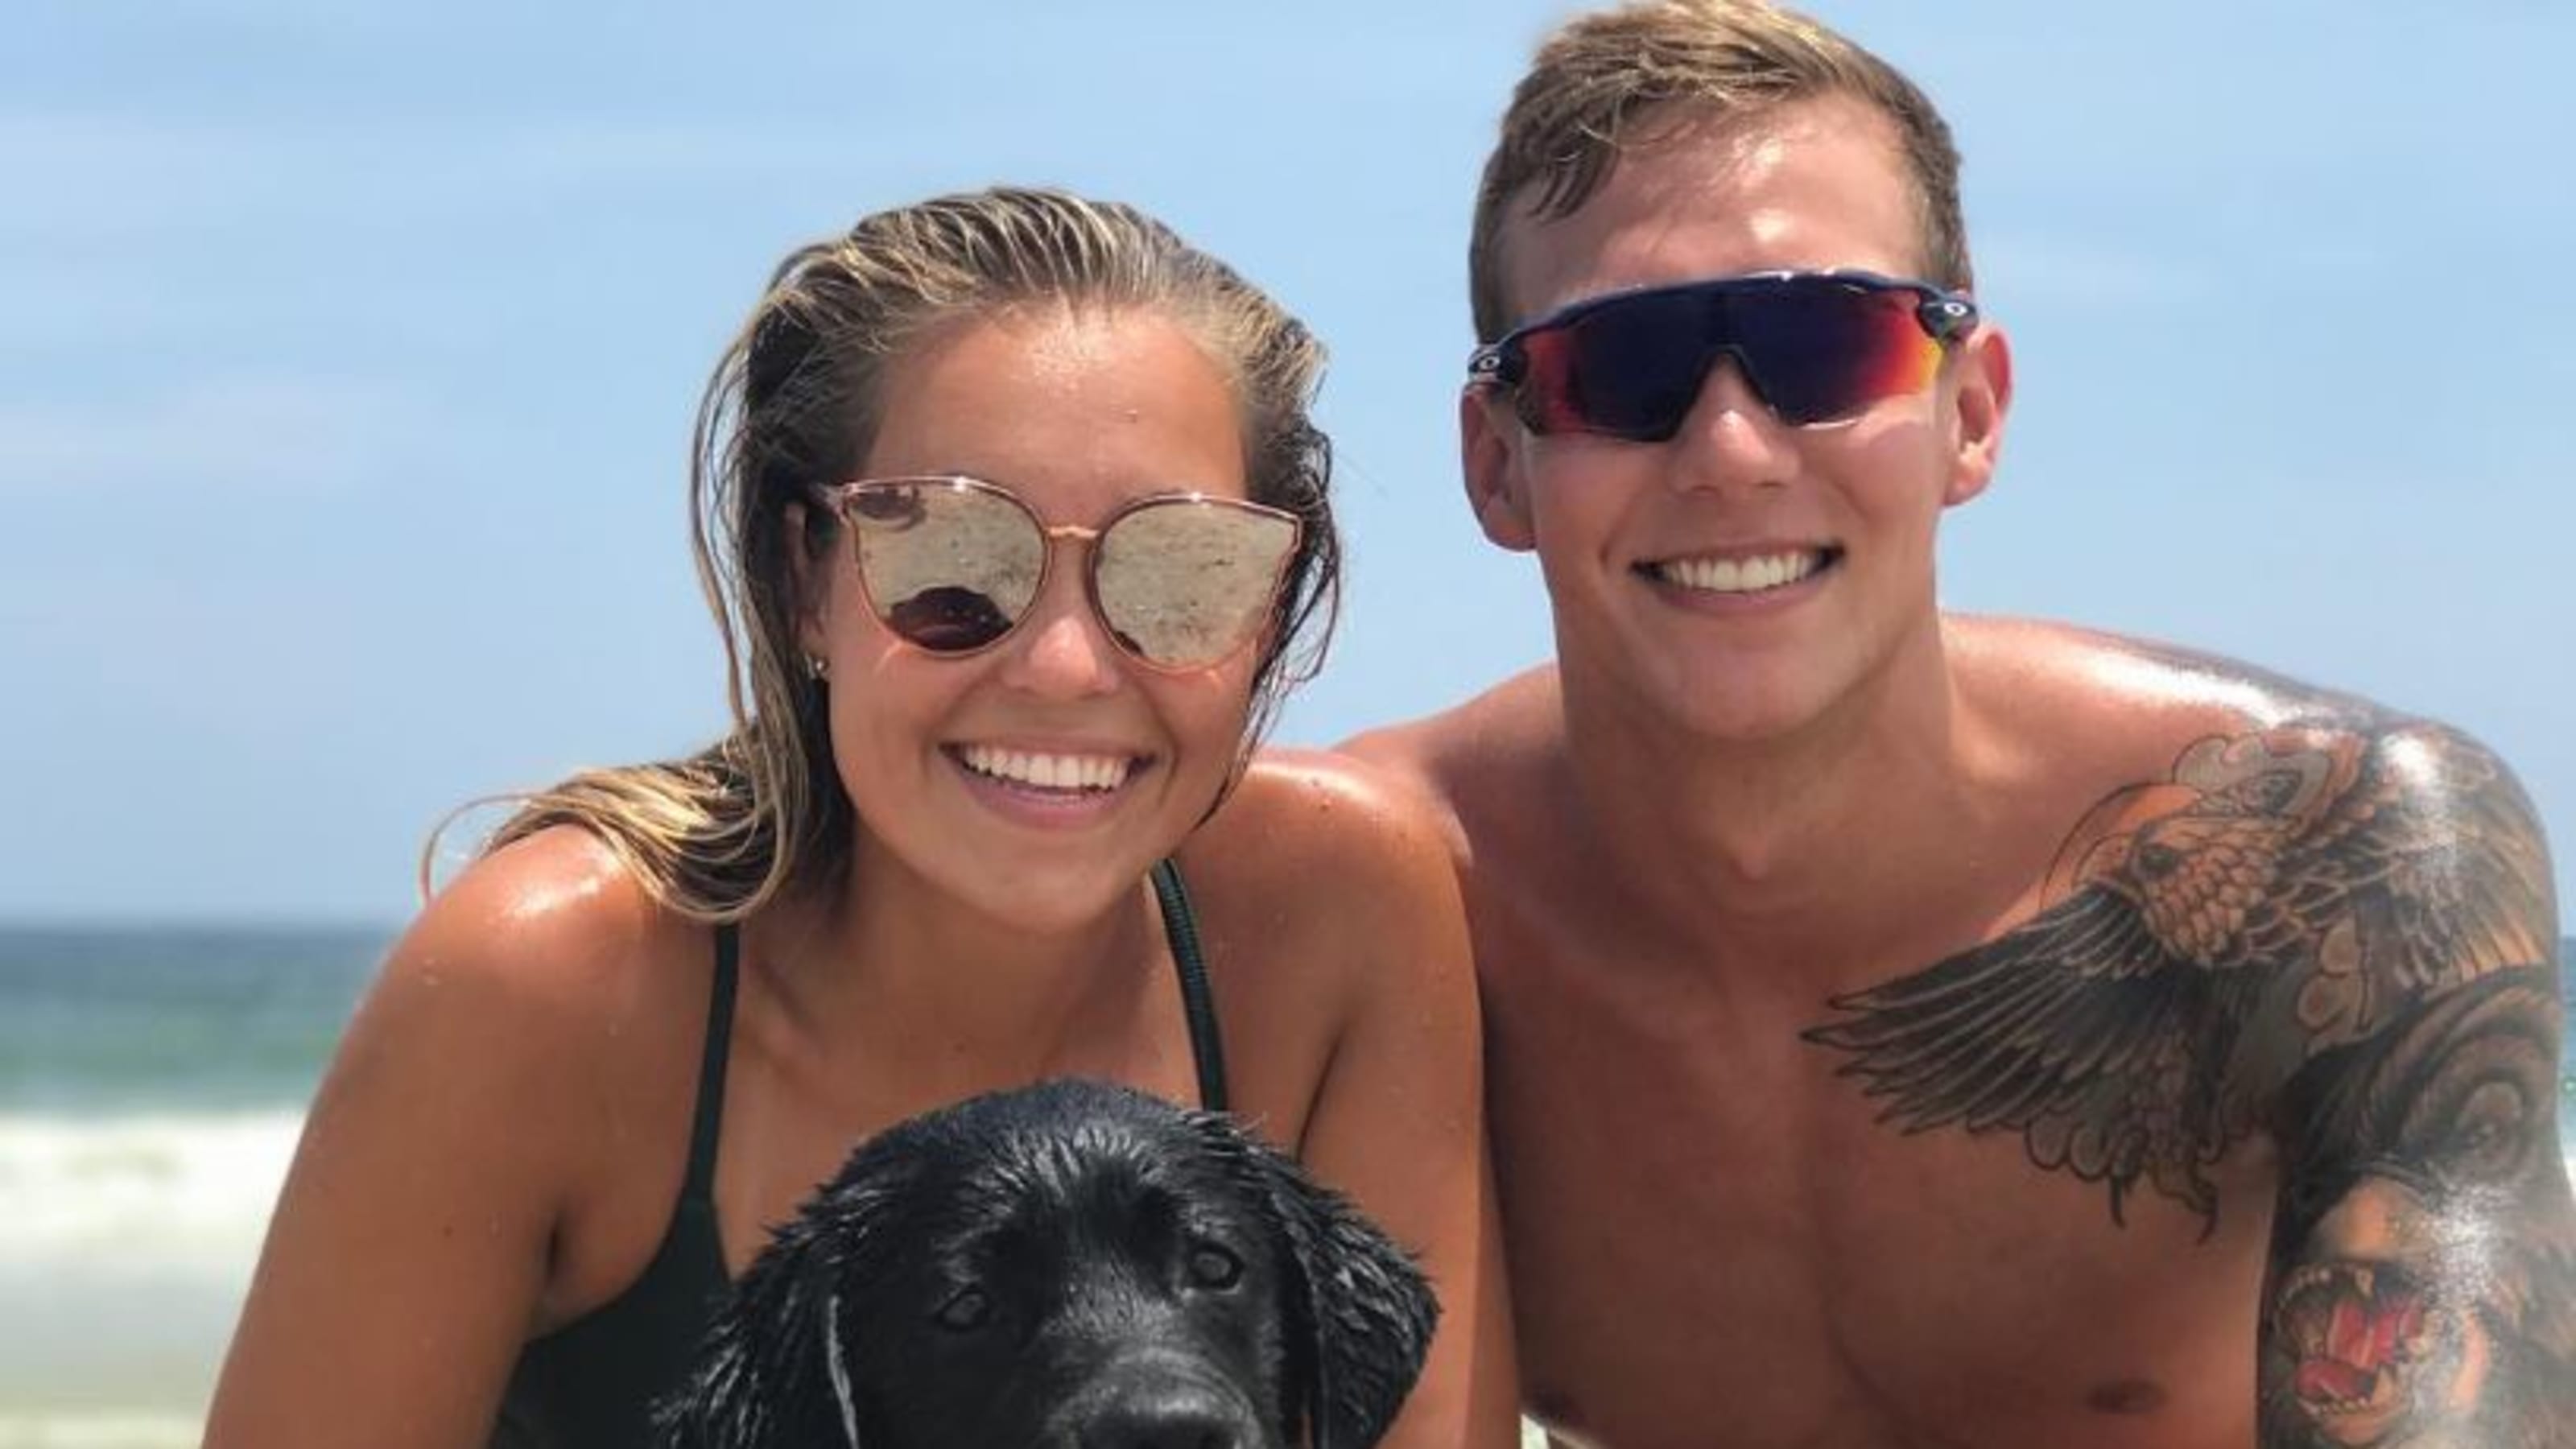 Even Caeleb Dressel's dog Jane swims better than most of us